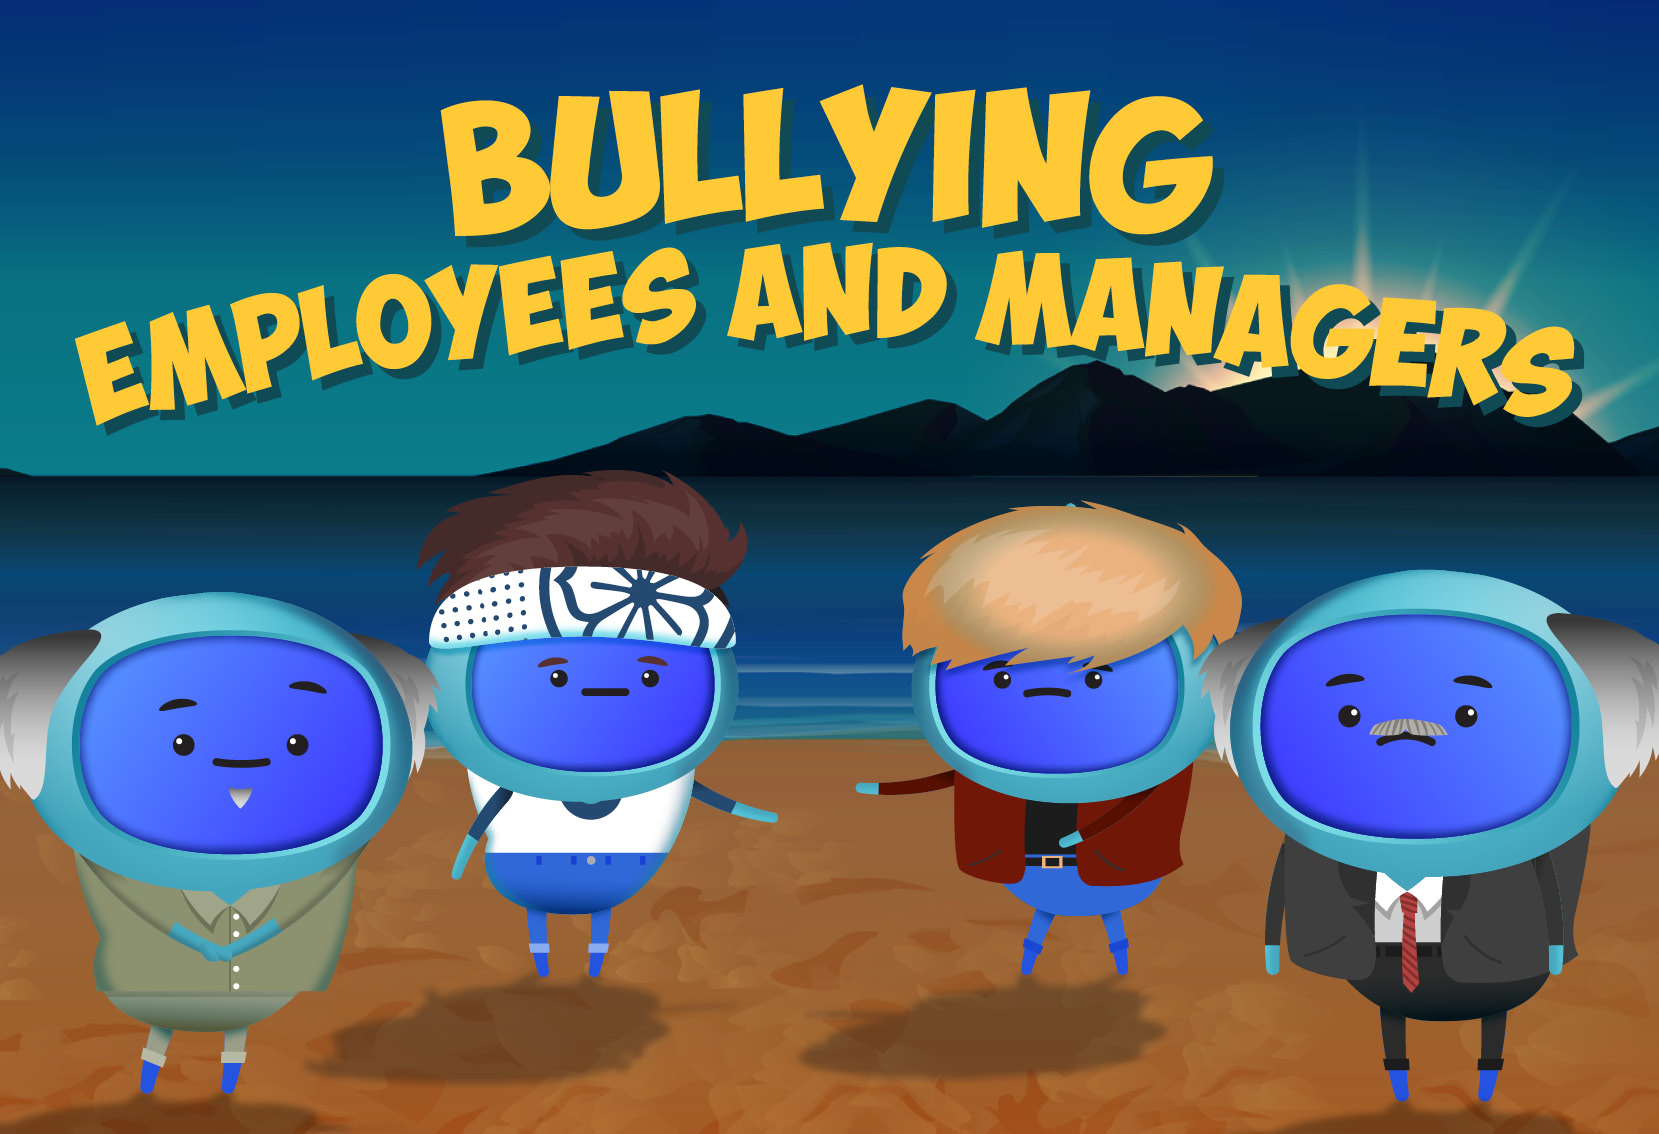 00082 - Bully - Employees and Managers - LMS Thumb-3